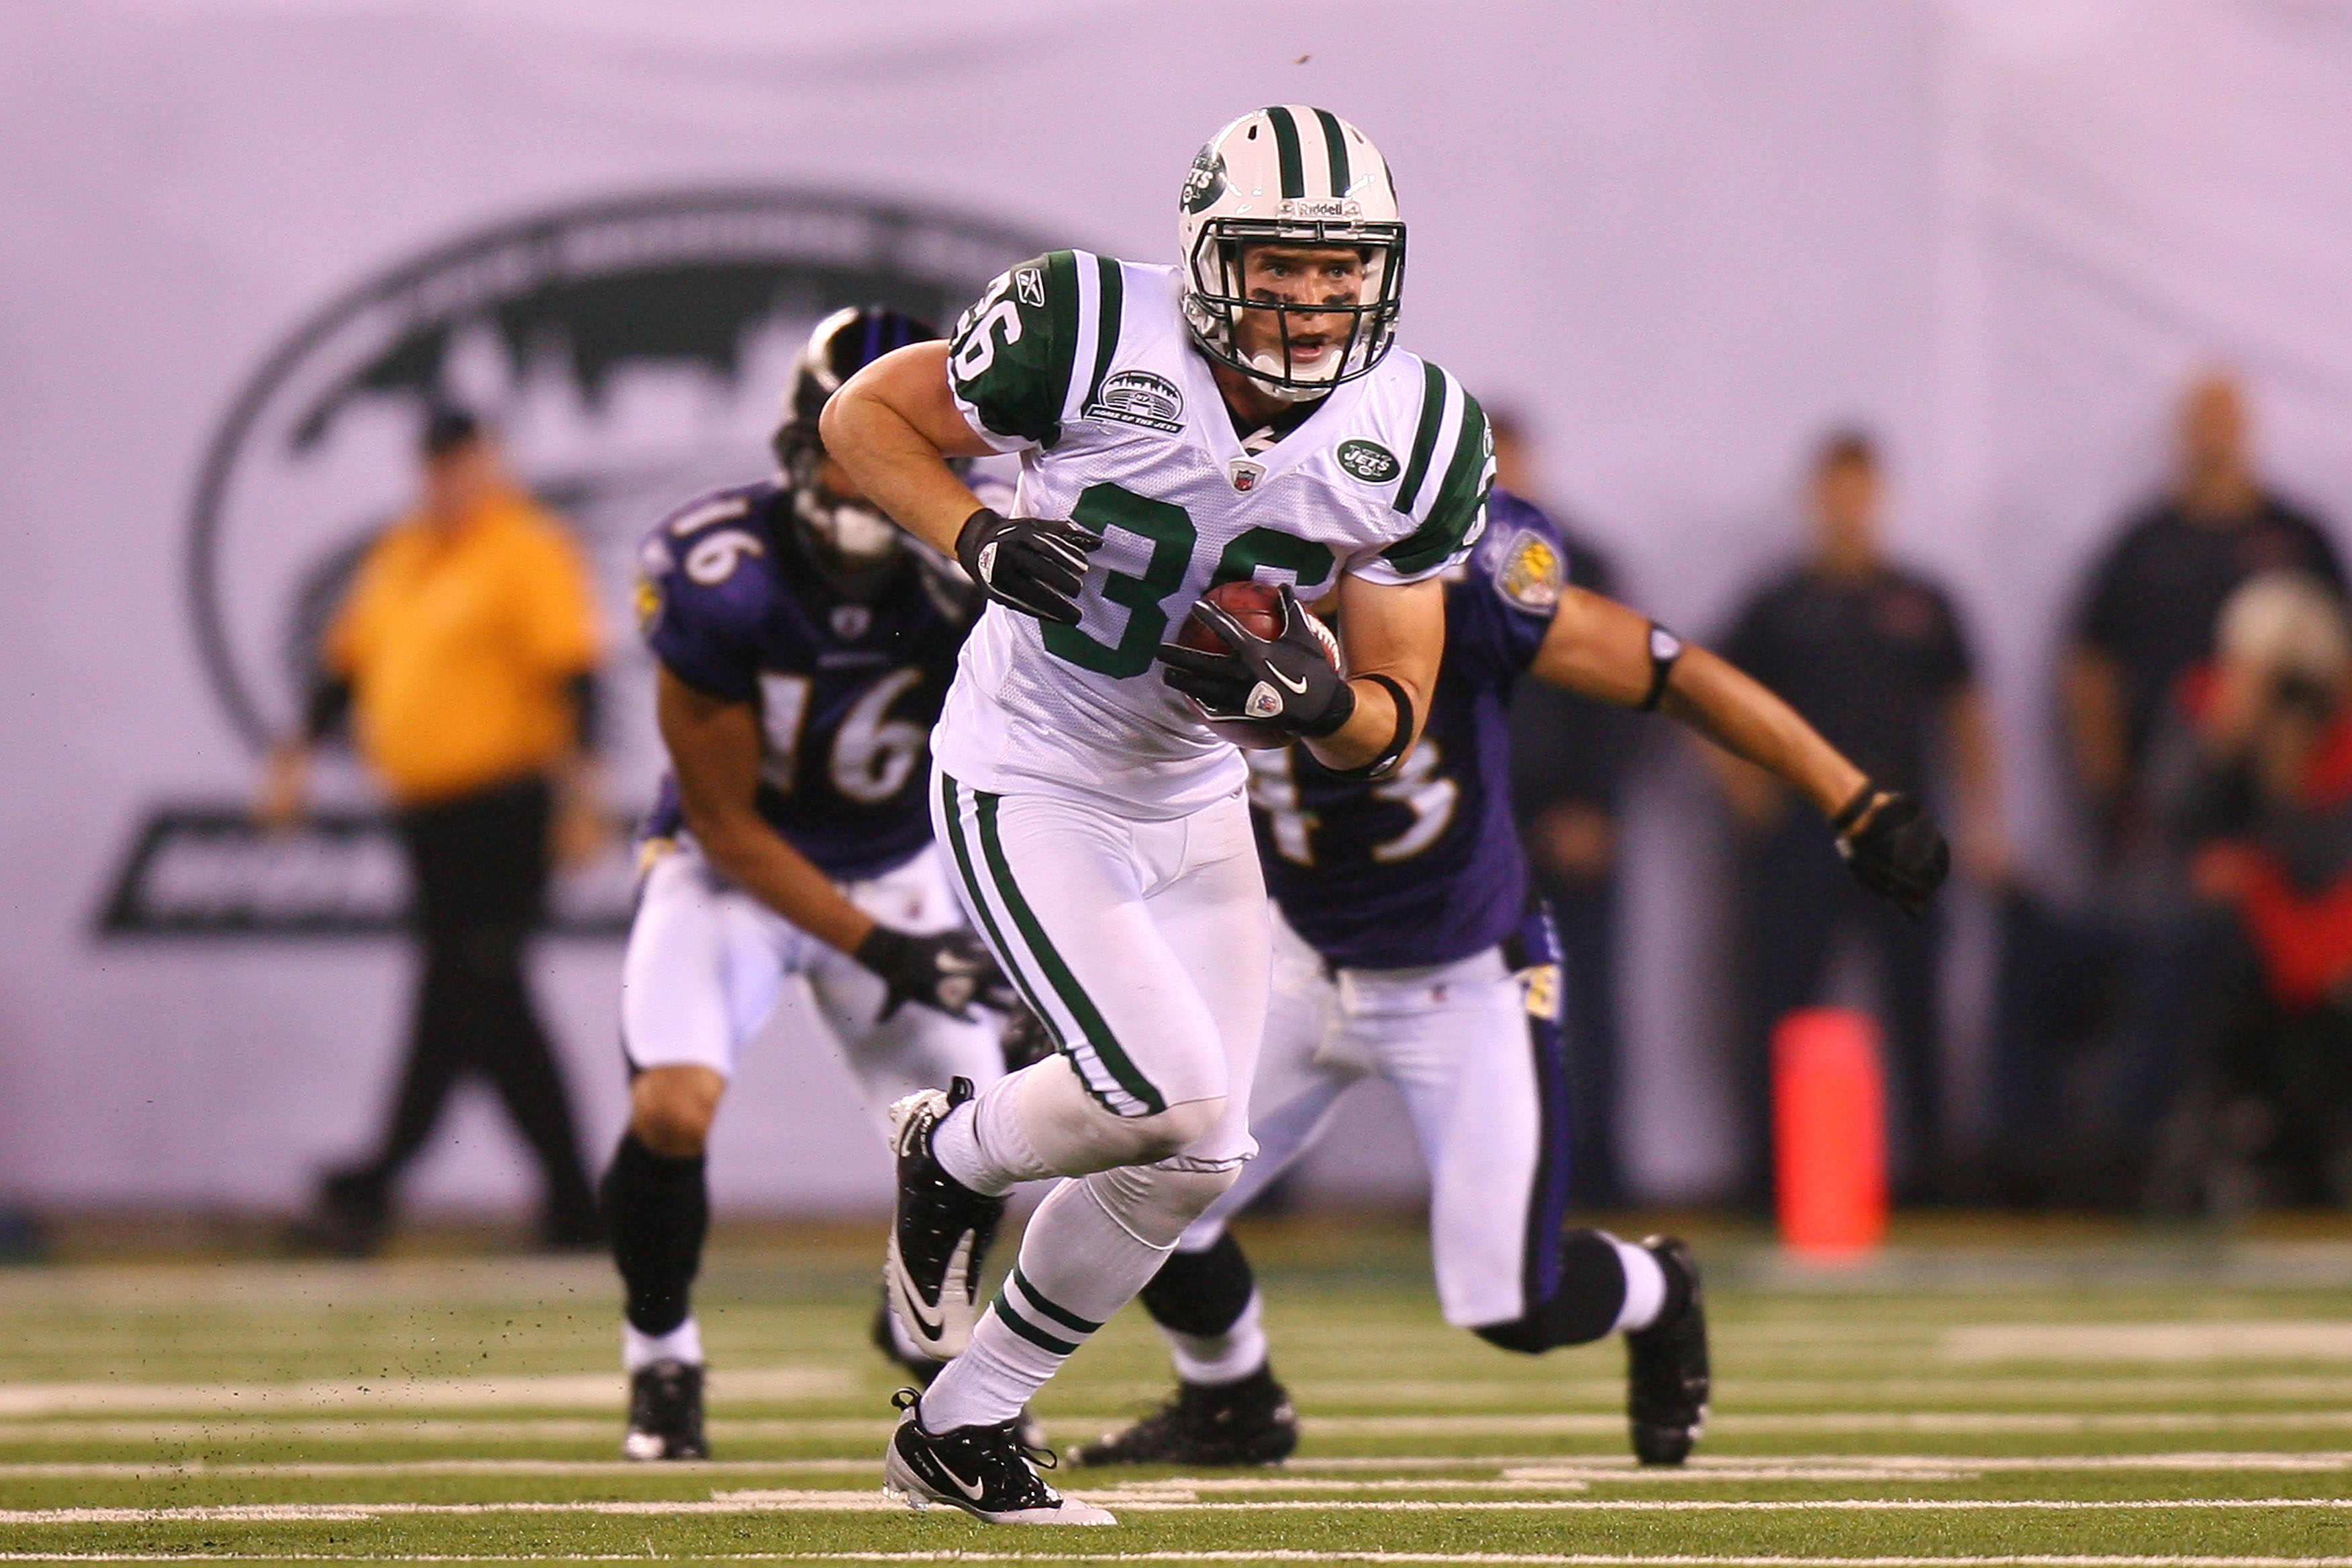 EAST RUTHERFORD, NJ - SEPTEMBER 13:  Jim Leonhard #36 of the New York Jets in action against the Baltimore Ravens during their home opener at the New Meadowlands Stadium on September 13, 2010 in East Rutherford, New Jersey.  (Photo by Andrew Burton/Getty